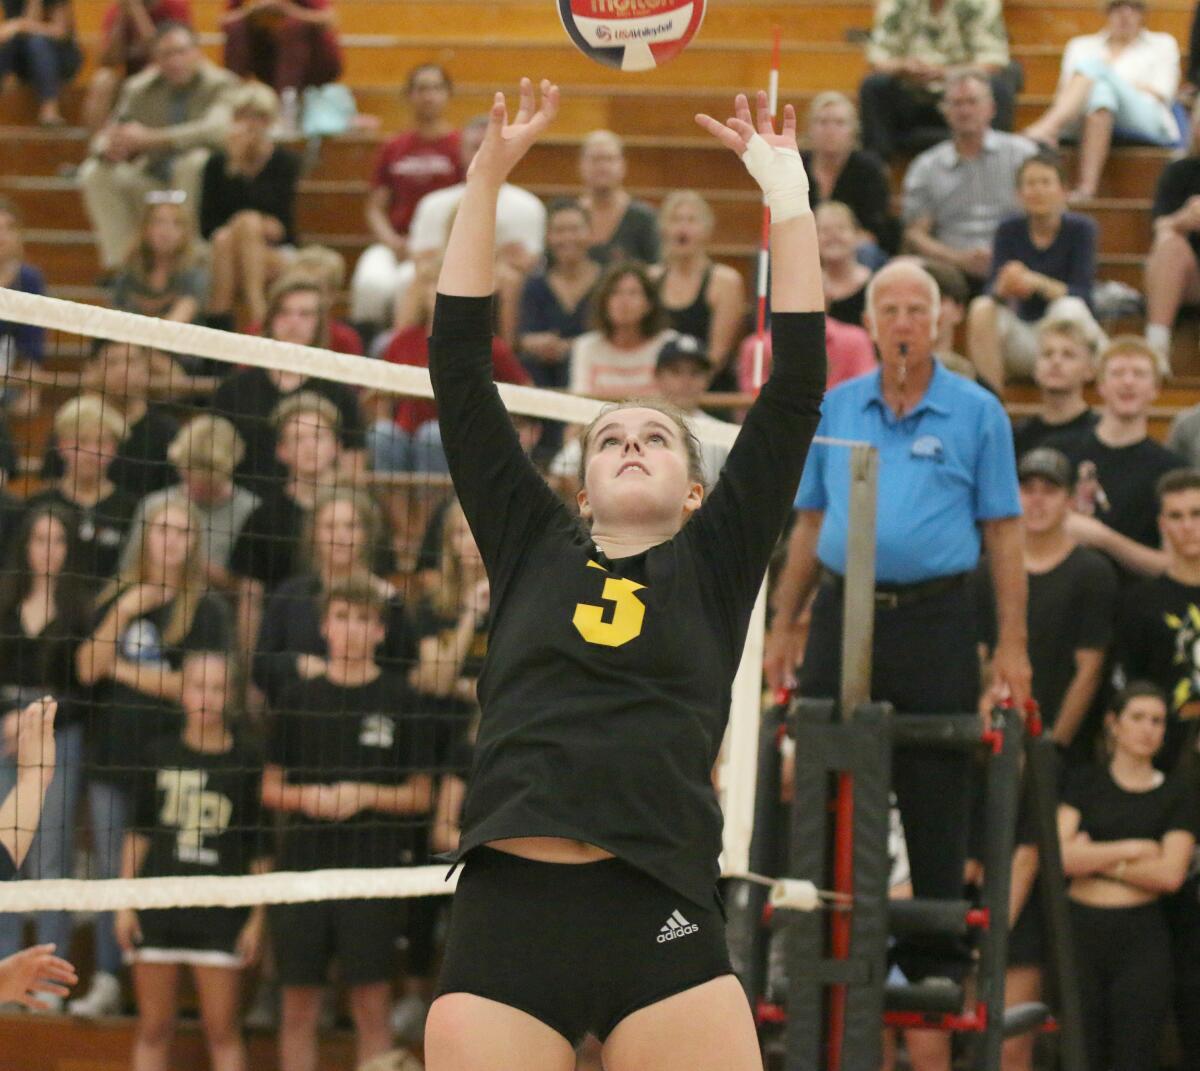 Senior setter Carly Diehl had the Torrey Pines offense running on all cylinders.